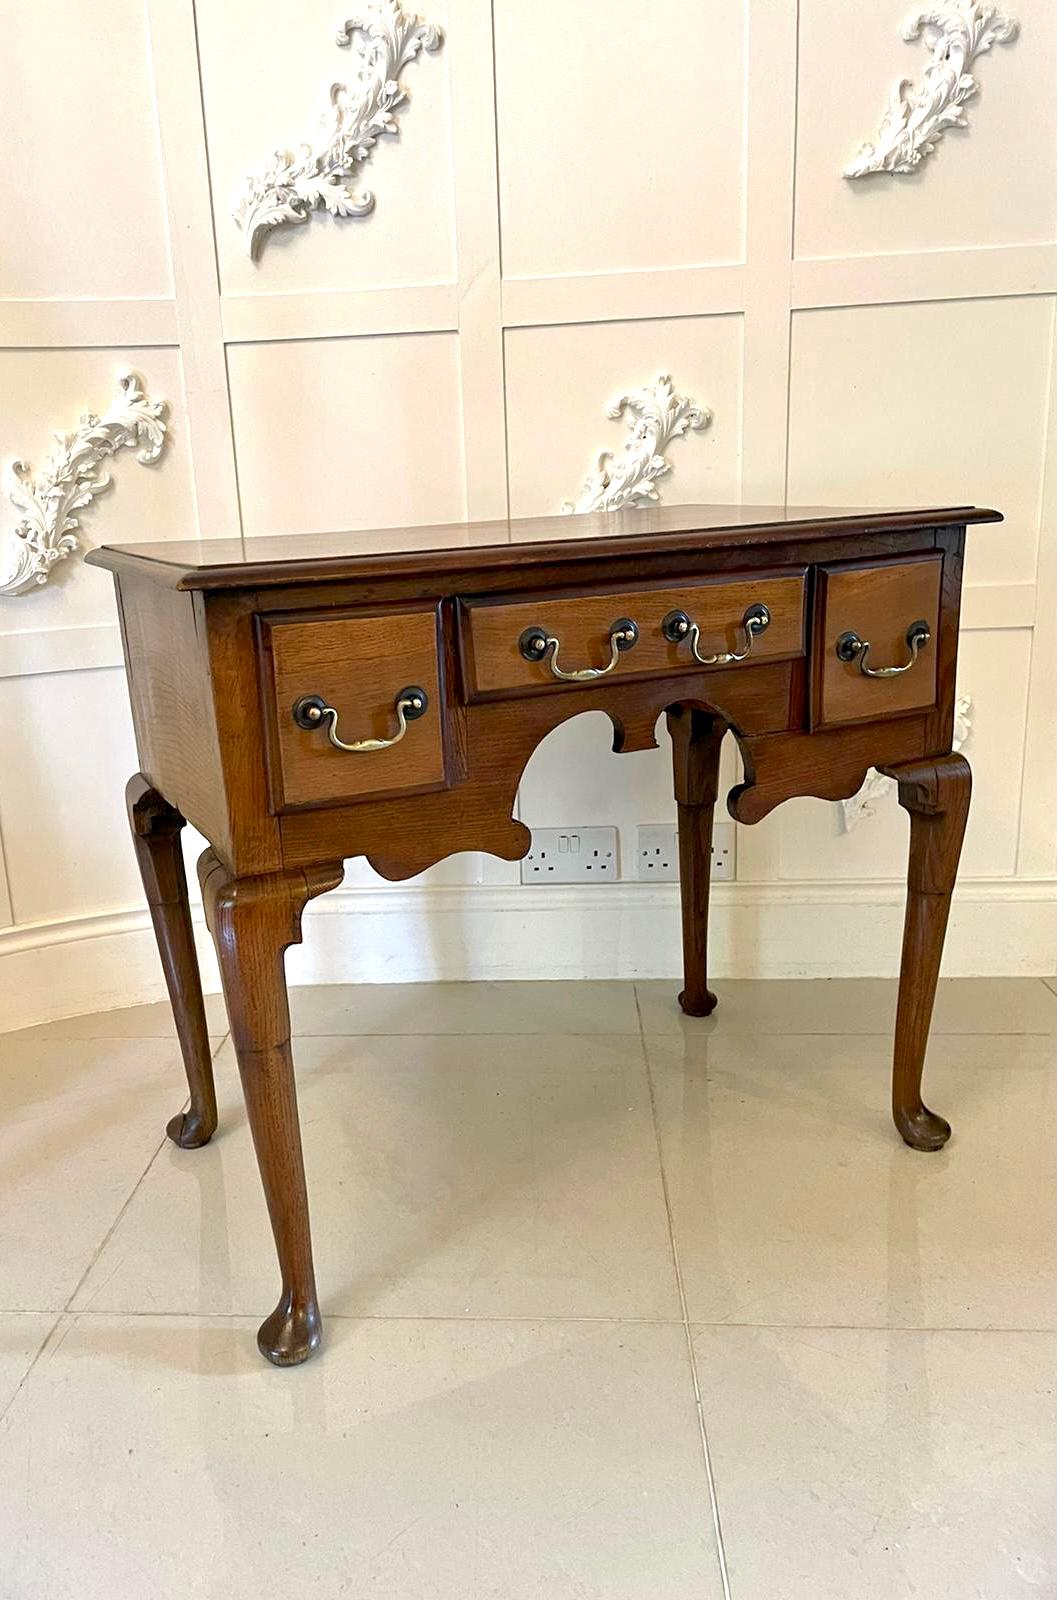 Antique George III quality oak lowboy having a quality rectangle oak top with a moulded edge above three drawers with brass swan neck handles and a shaped apron. It is raised upon four shaped cabriole legs with pad feet.

A lovely example in